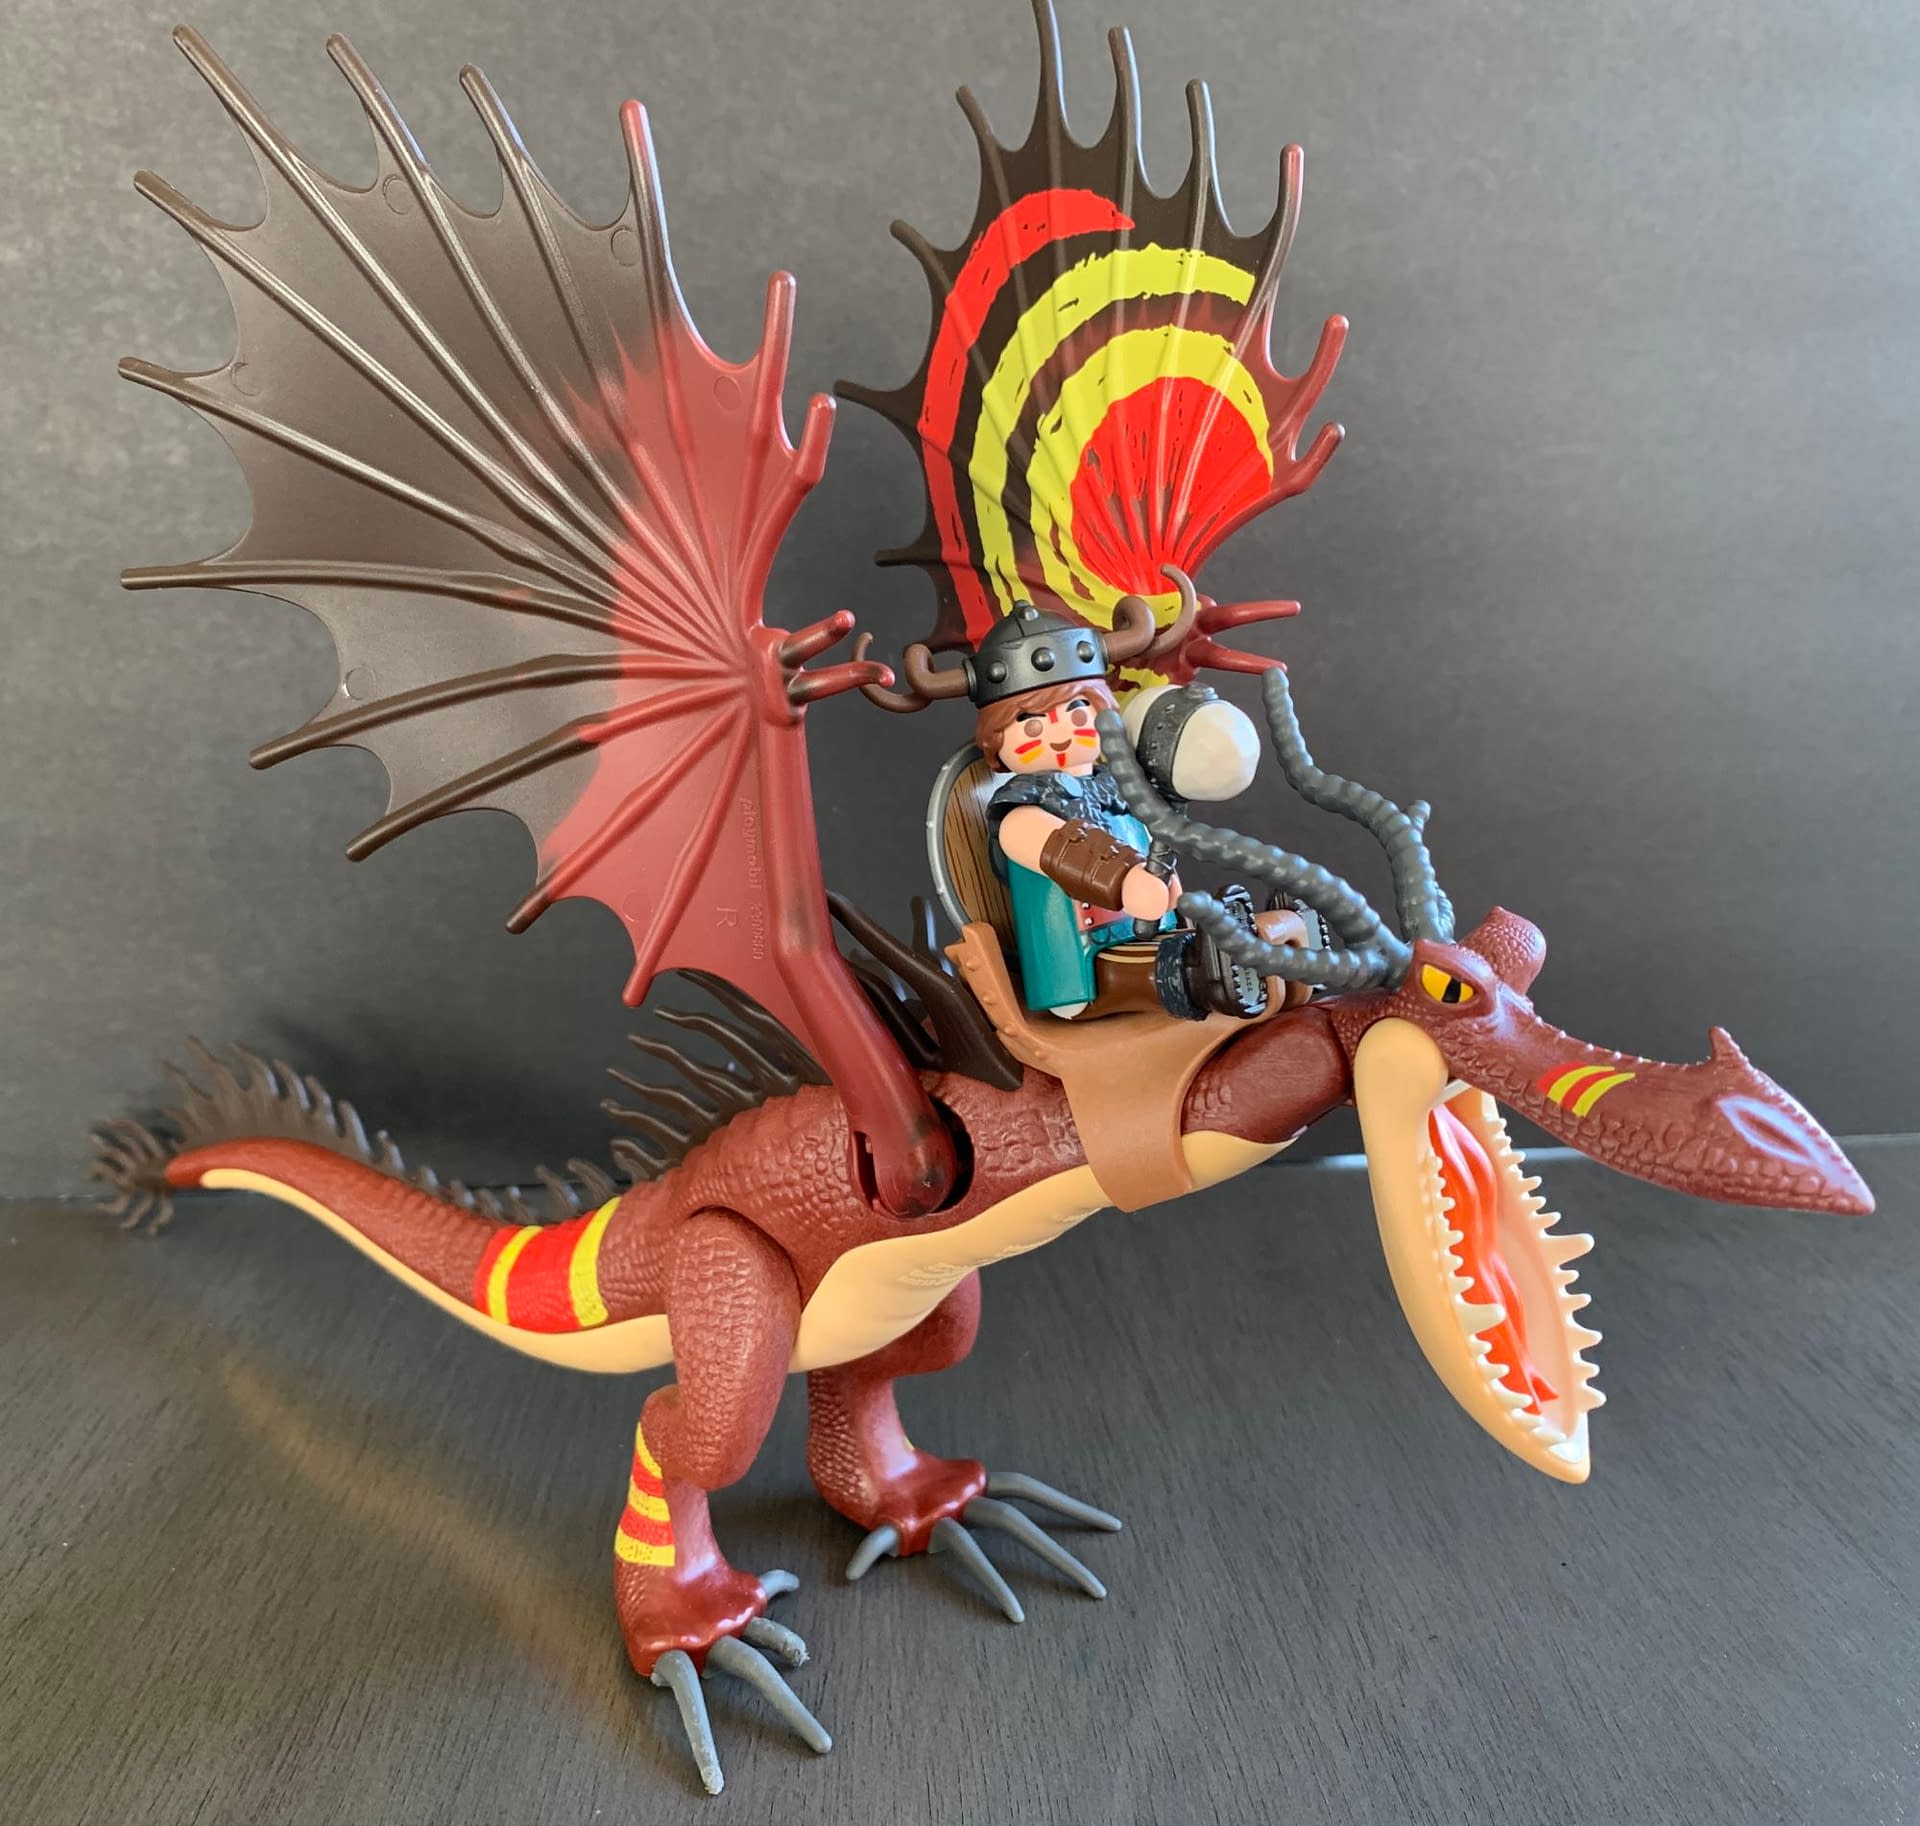 Let's Take A Look At Playmobil's New Dragons Playsets